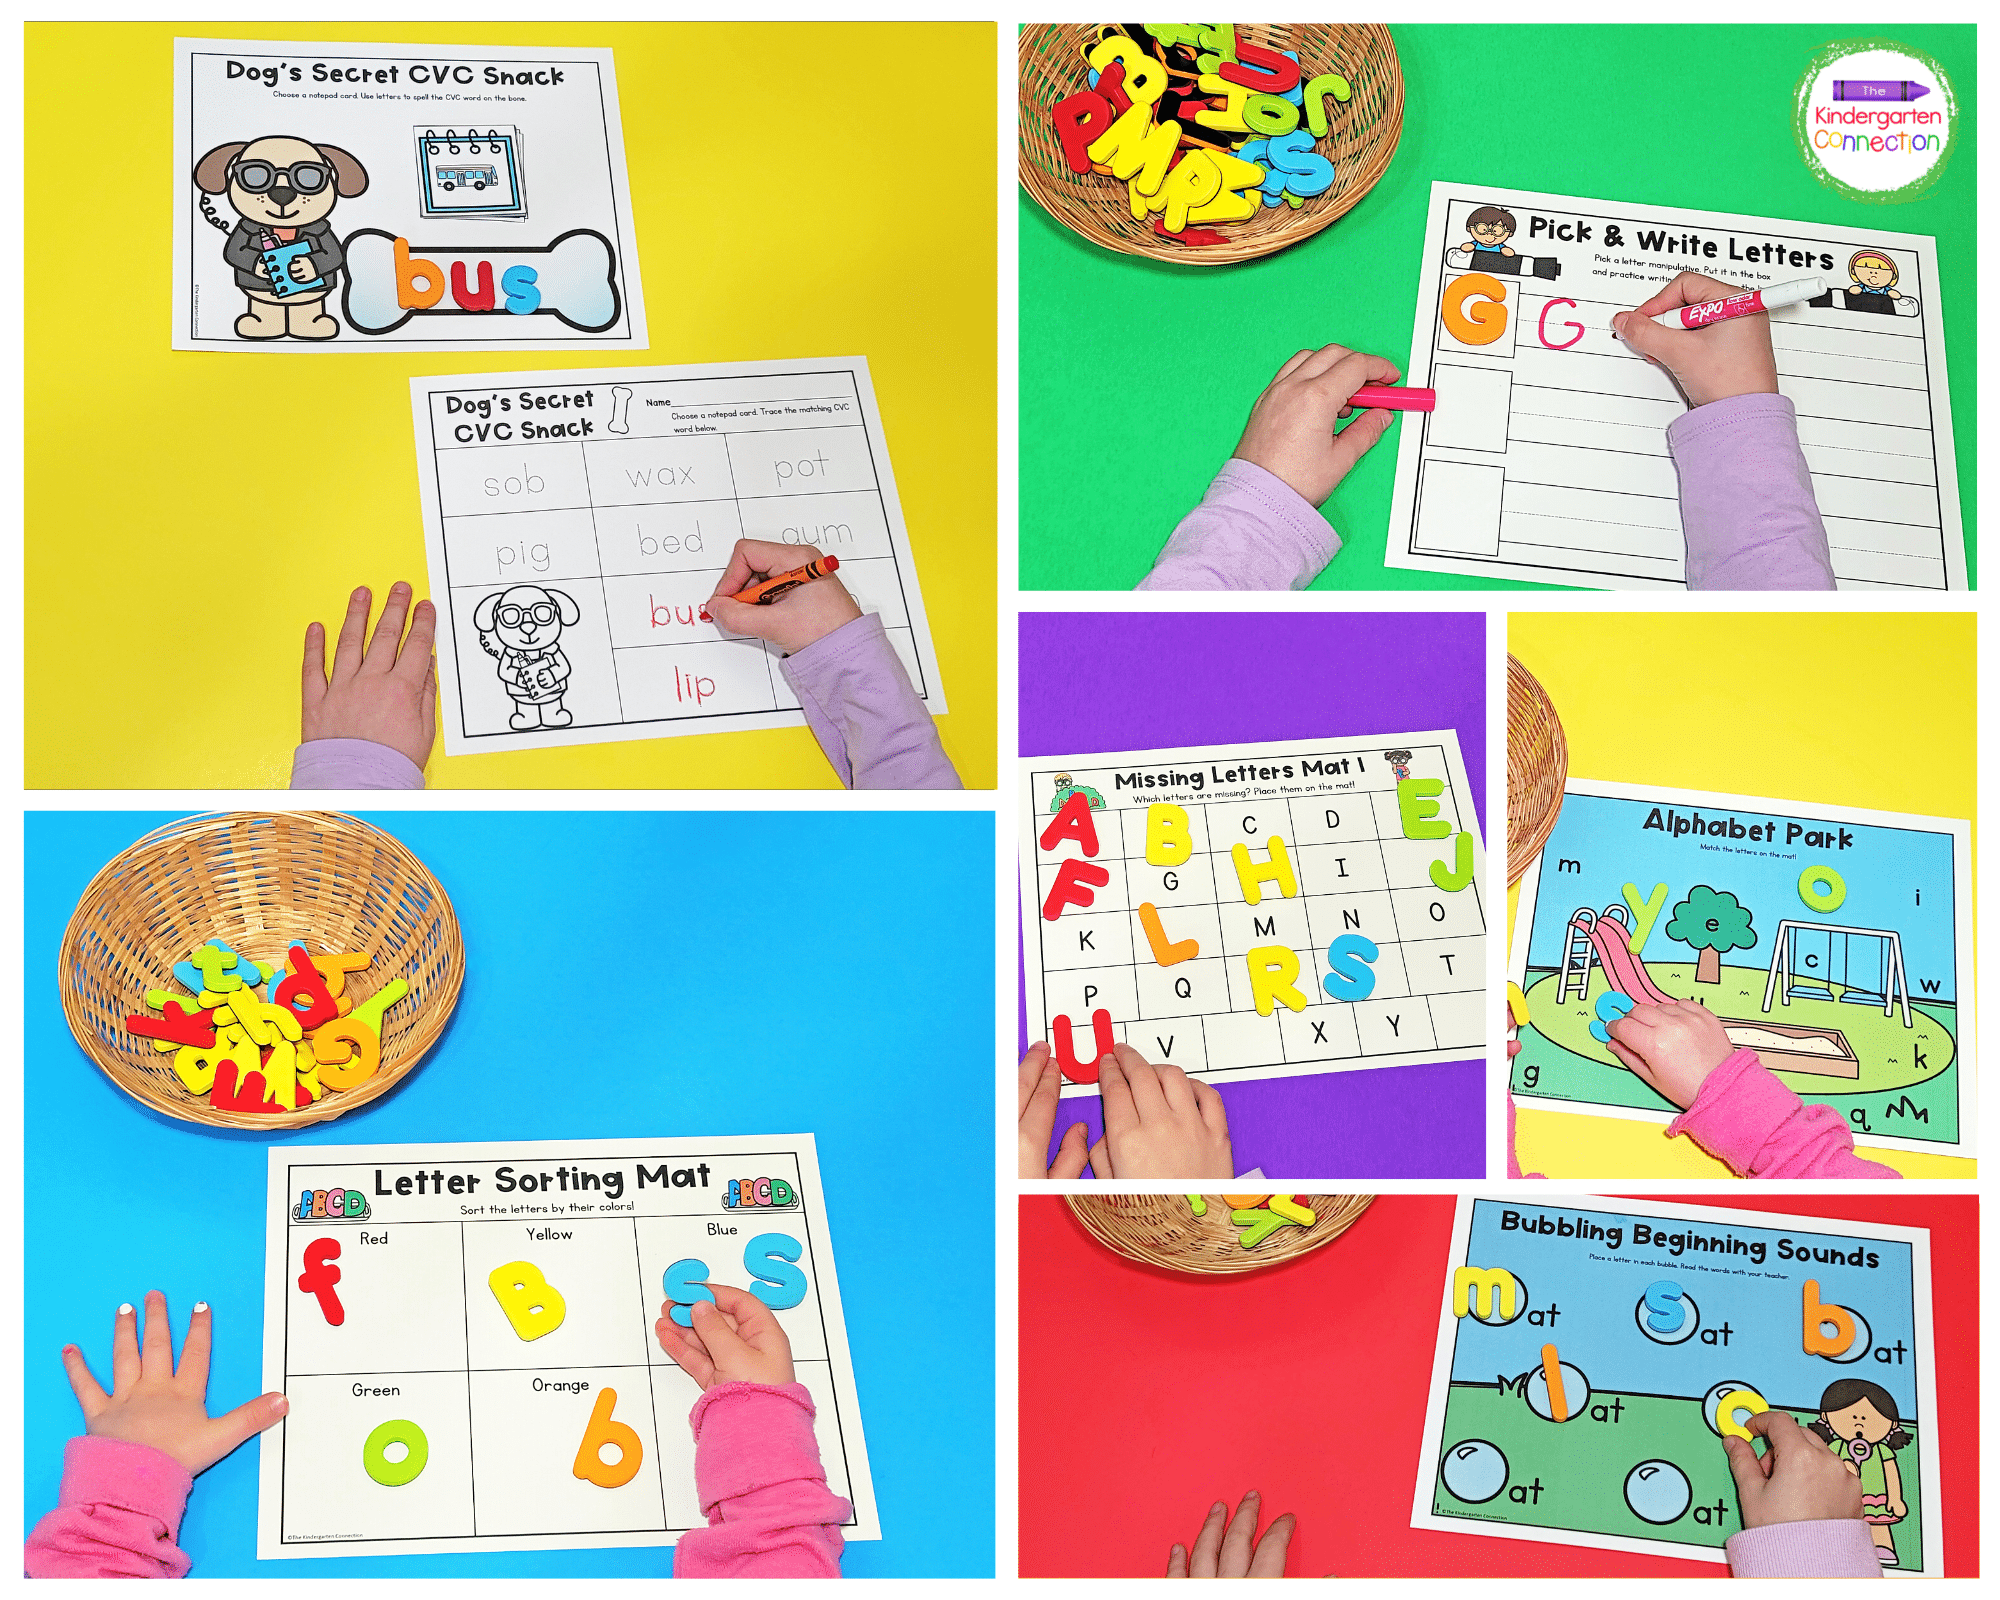 This pack is filled with printable resources that are designed to pair perfectly with letter manipulatives!